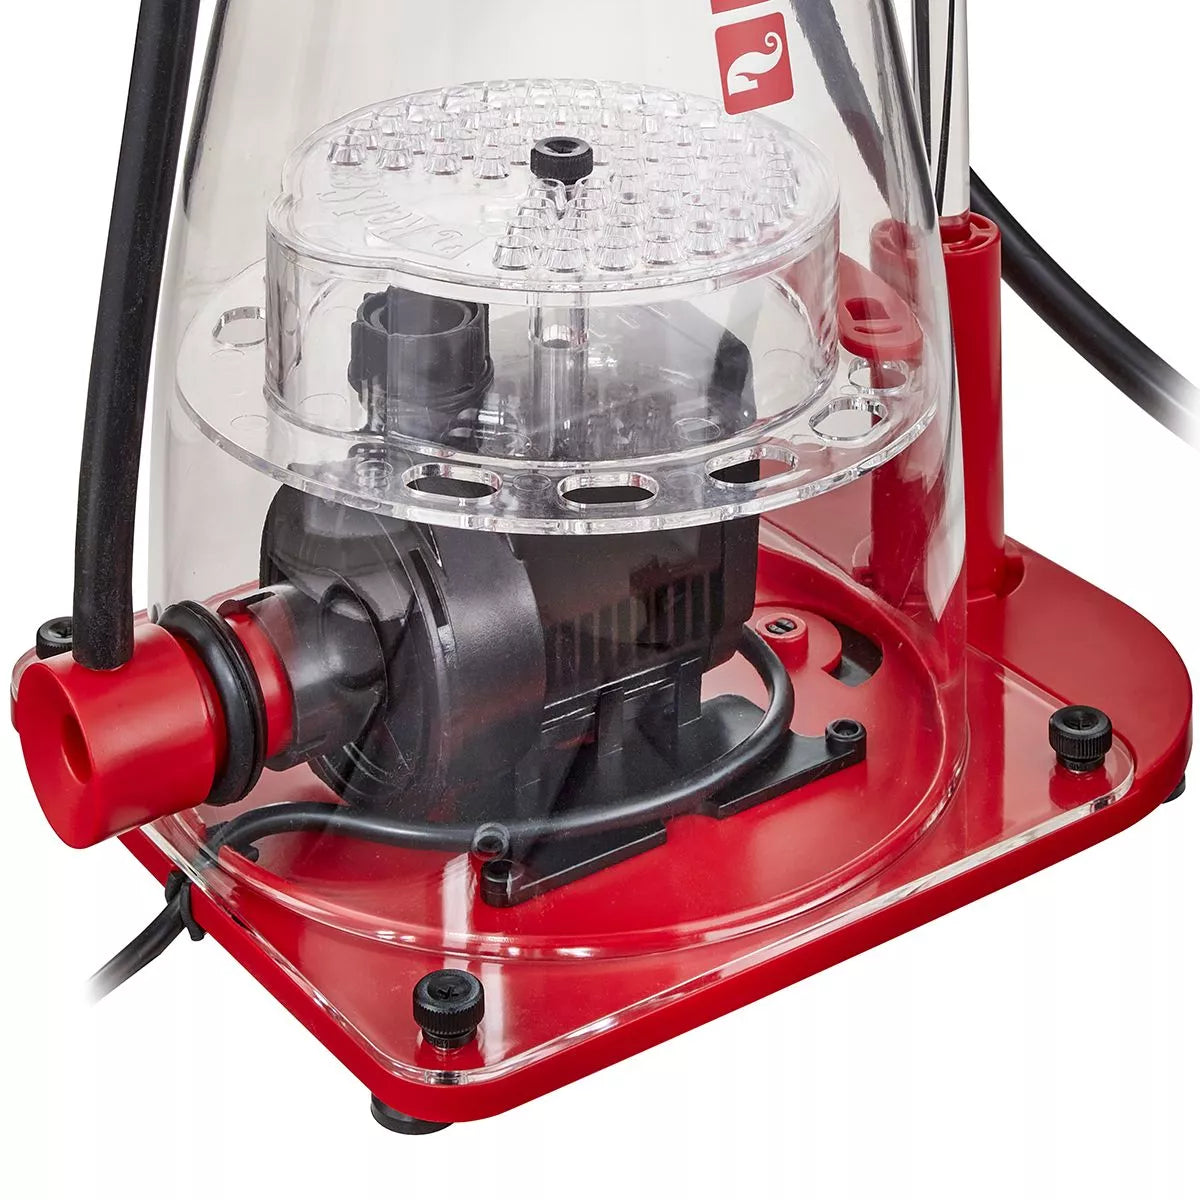 Red Sea Reefer DC 600 Protein Skimmer